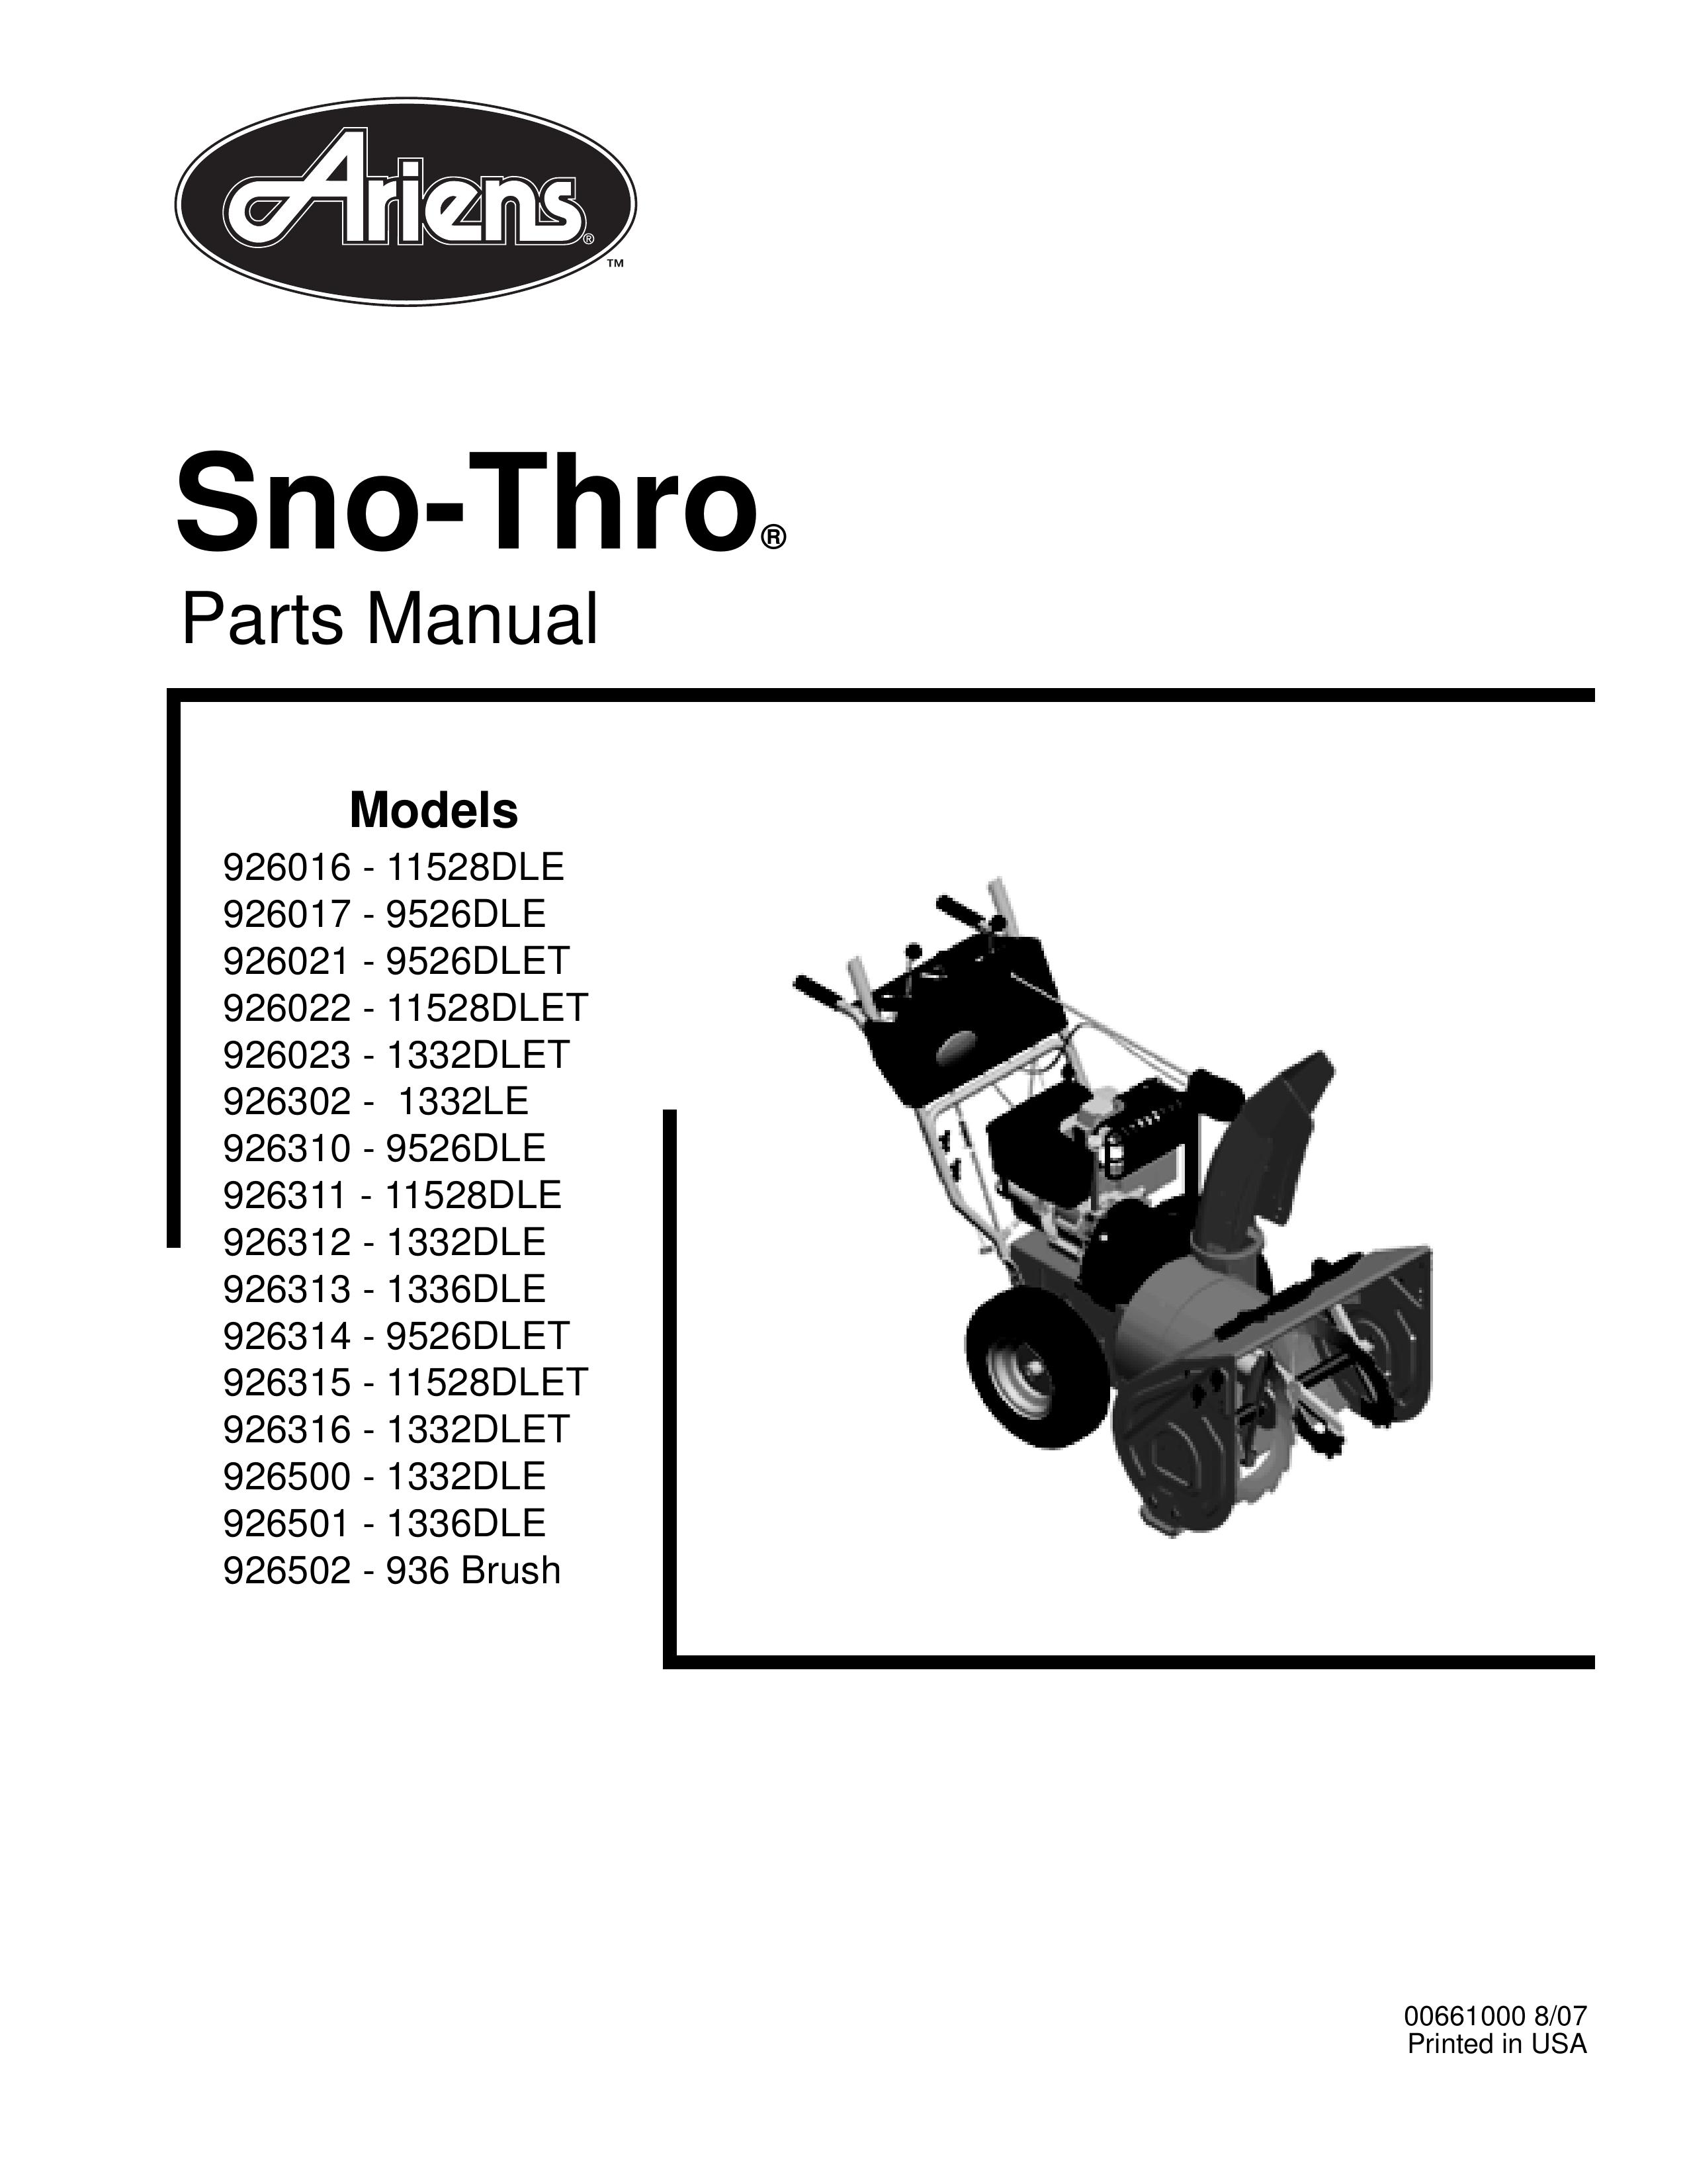 Ariens 926500 - 1332DLE Snow Blower Attachment User Manual